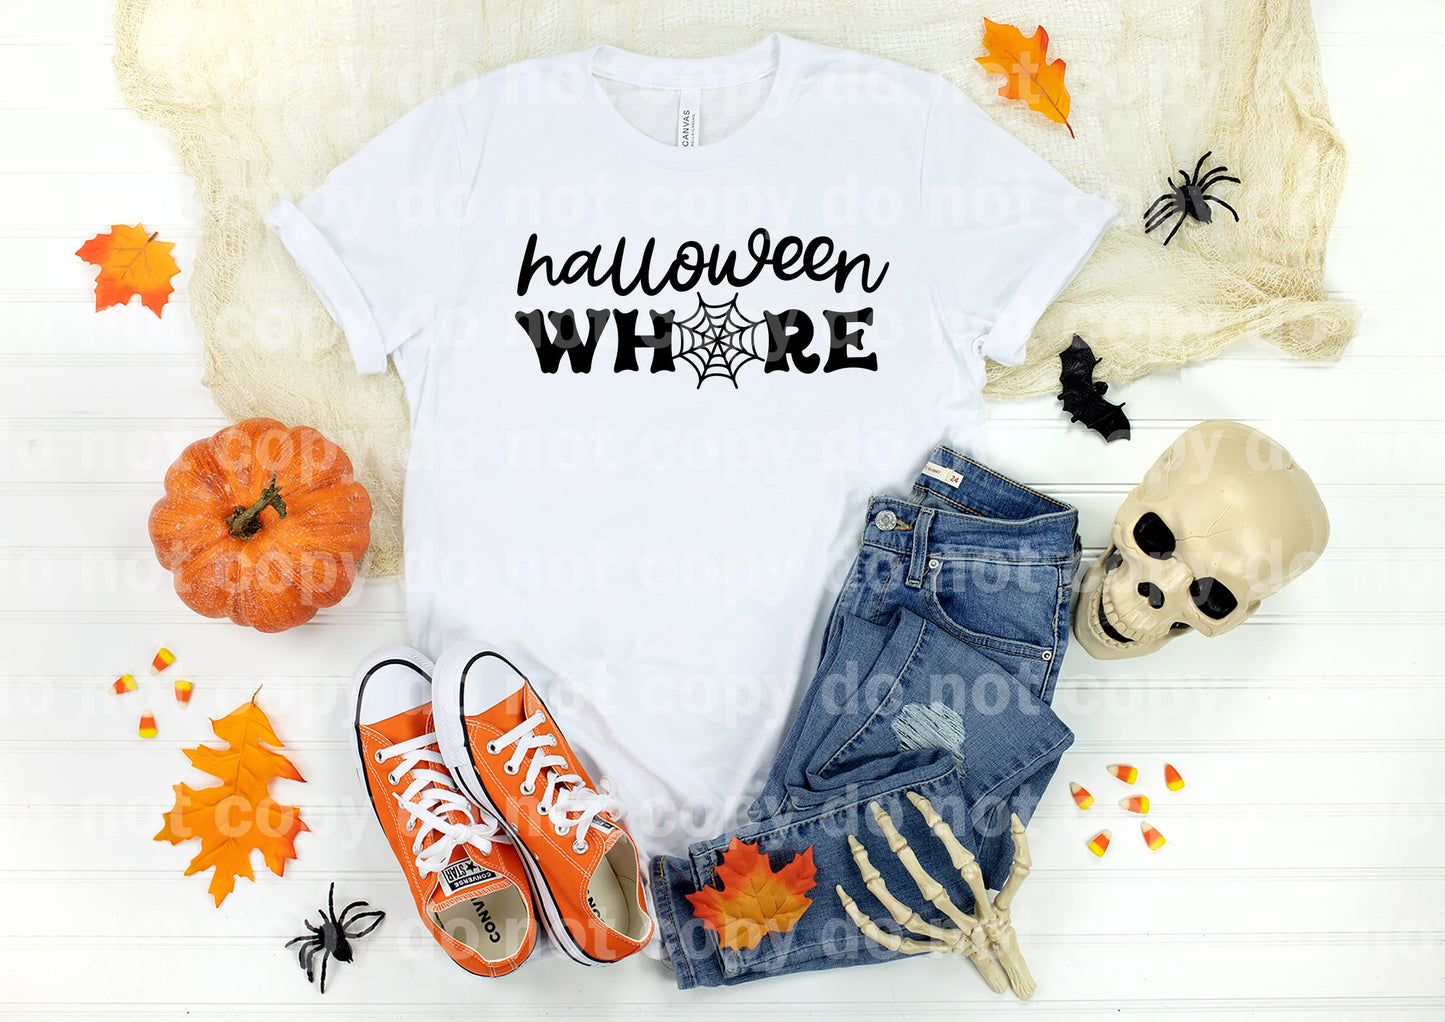 Halloween Whore Distressed/Non Distressed Dream Print or Sublimation Print